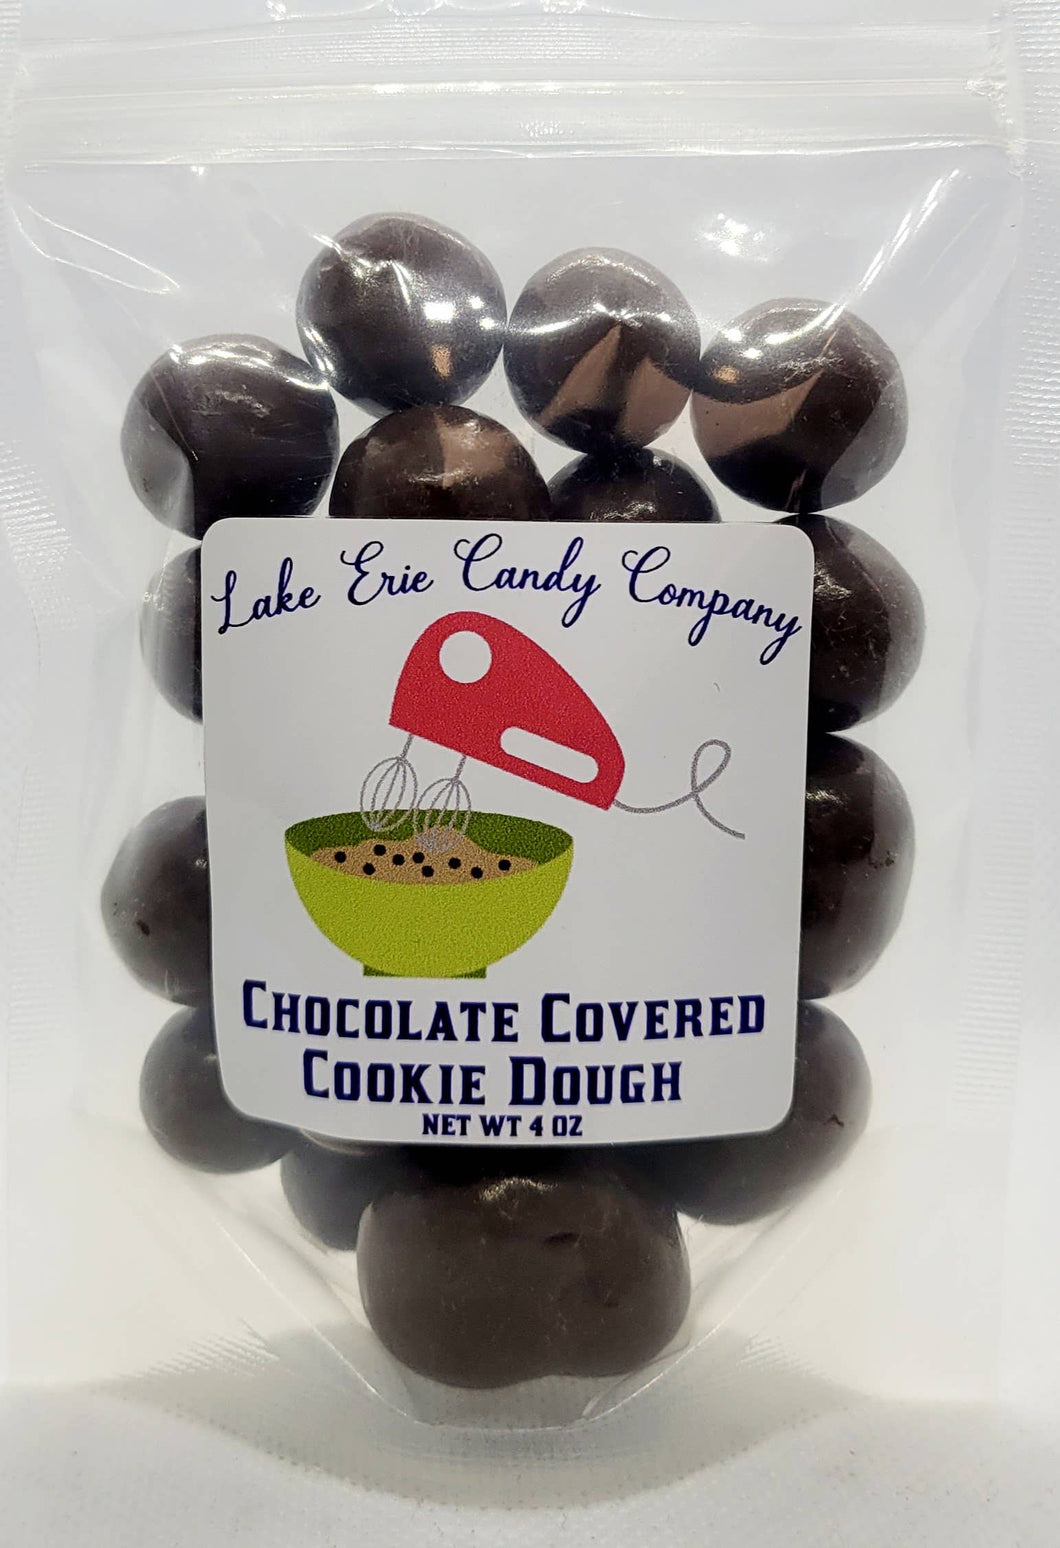 Lake Erie Candy Company - Chocolate Covered Cookie Dough